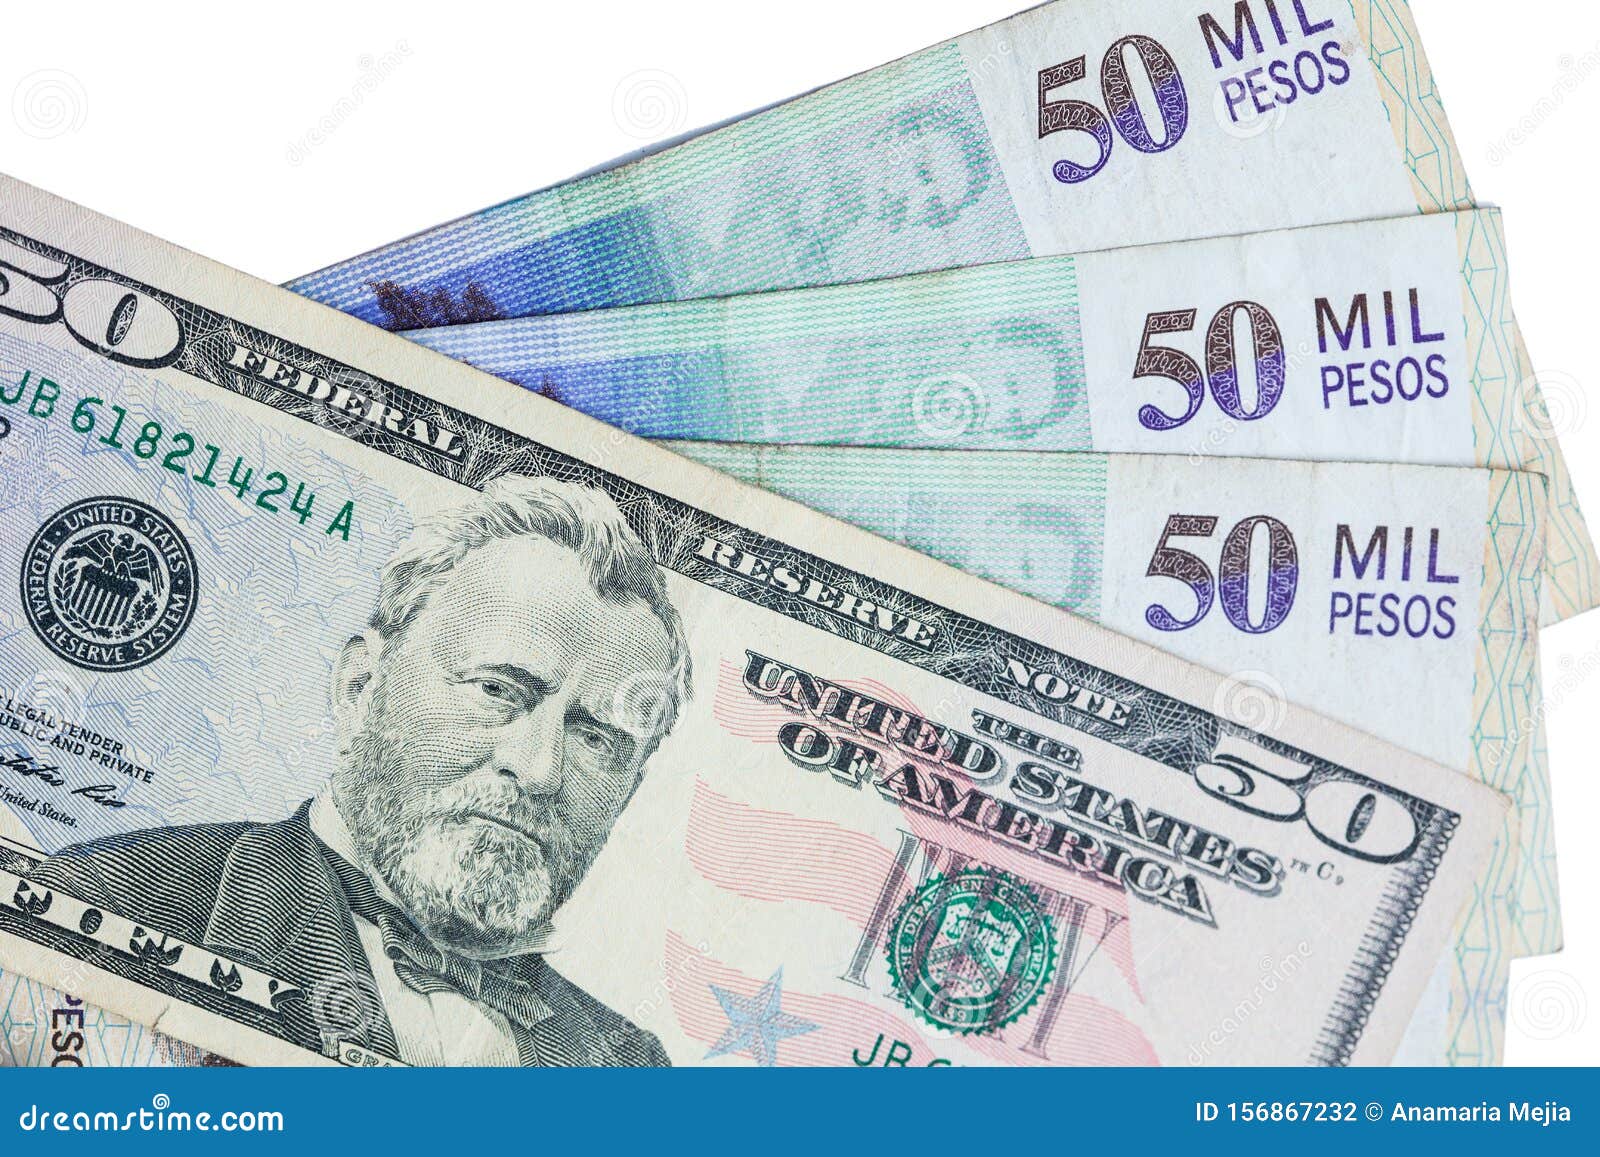 exchange-rate-between-us-dollar-and-colombian-peso-in-2019-stock-photo-image-of-fifty-notes